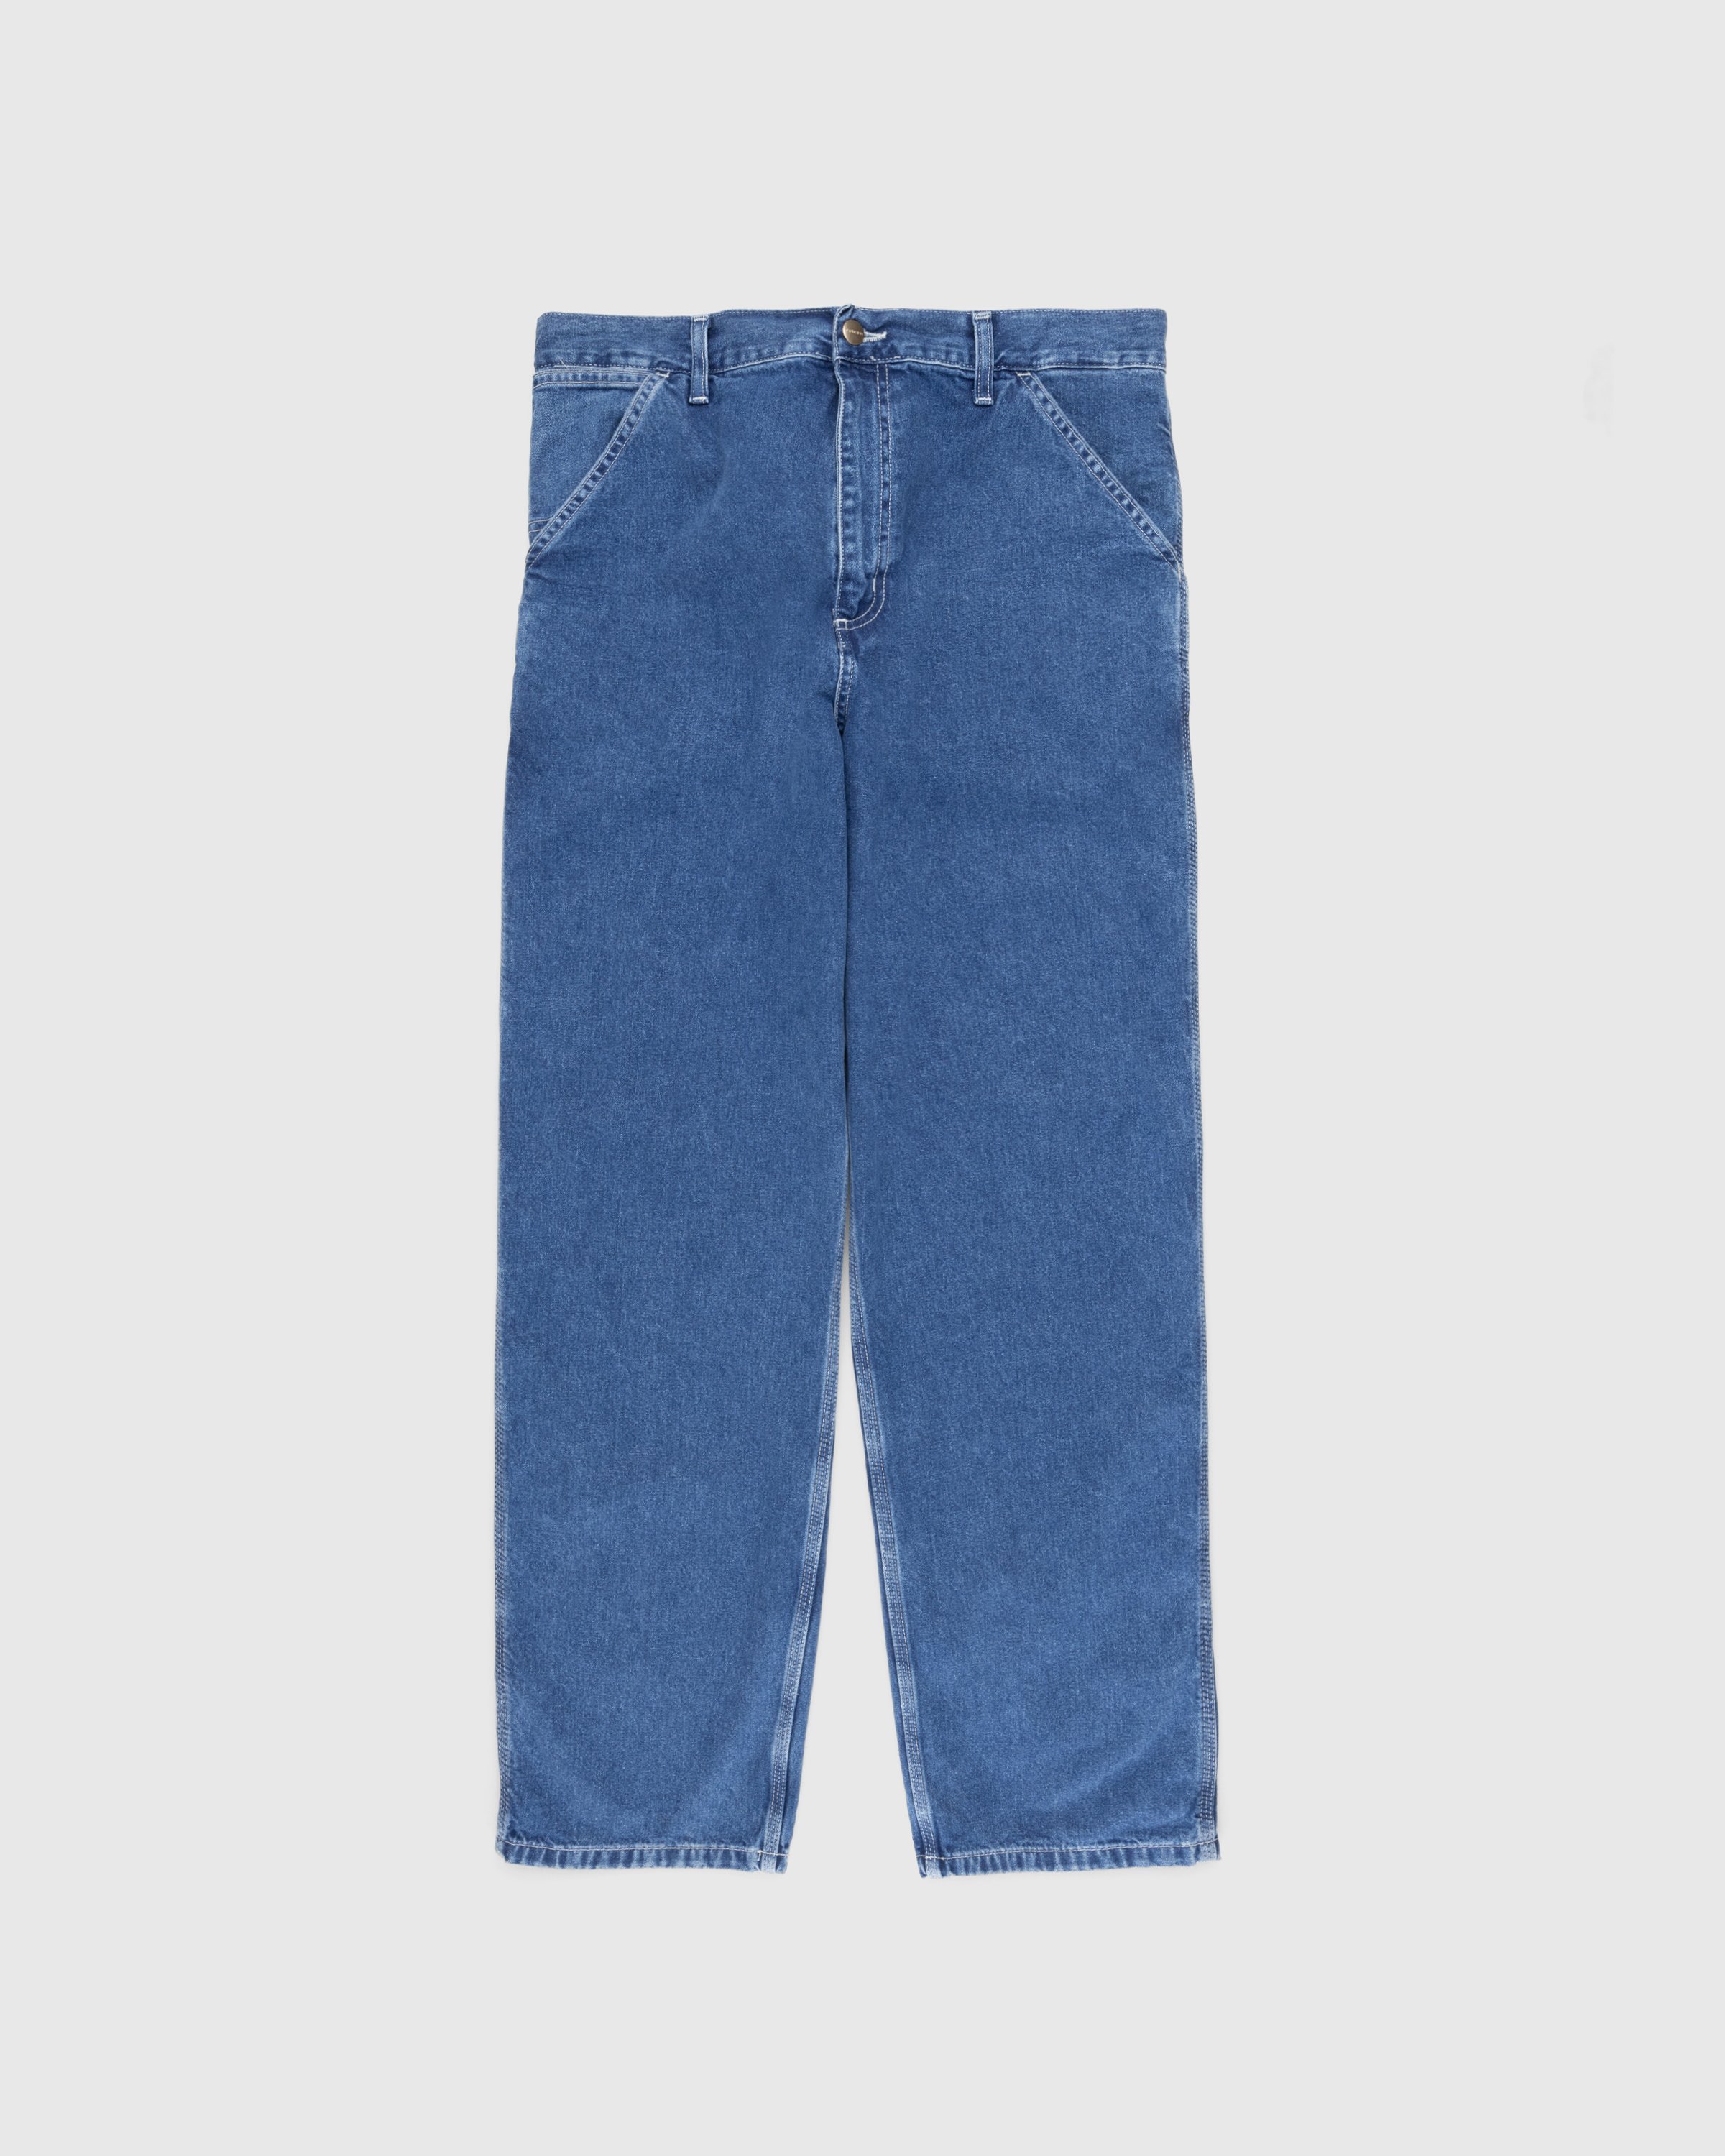 Carhartt WIP - Simple Pant Blue/Stone-Washed - Clothing - Blue - Image 1